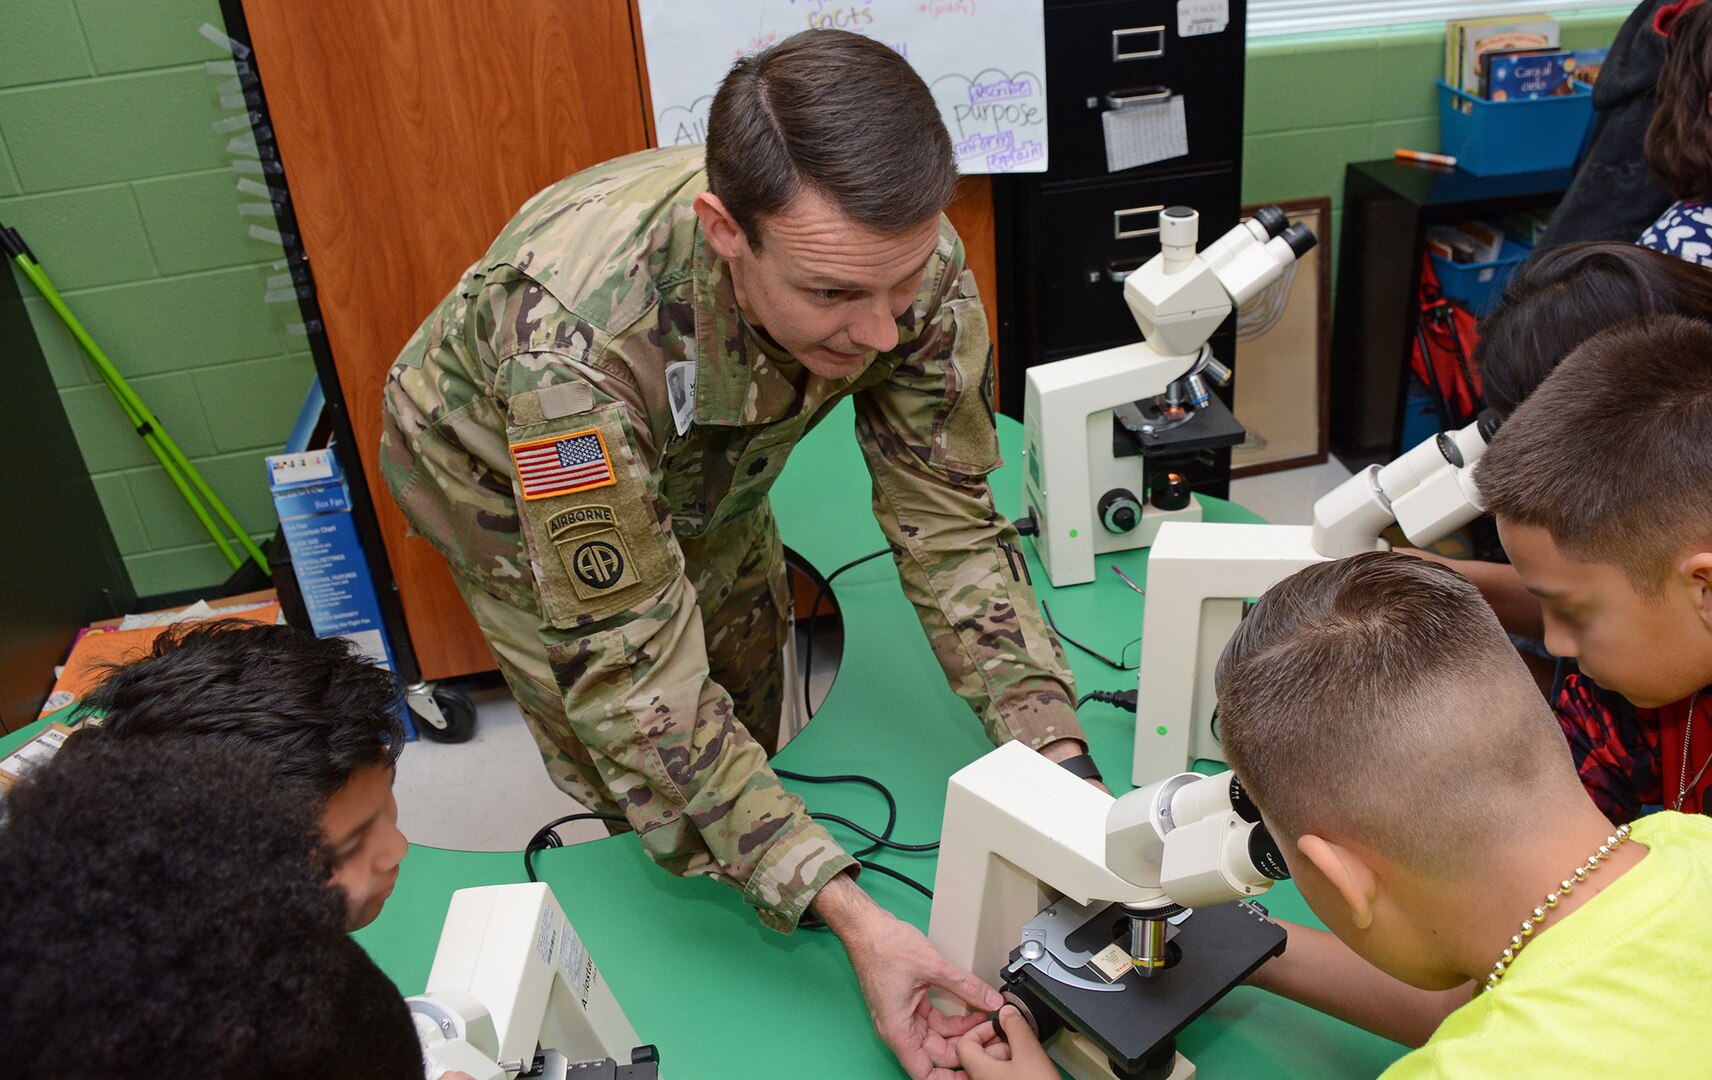 Lt. Col. Werner J. Barden, 264th Medical Battalion commander, assists East Terrell Hills Elementary School students viewing bacterial and pathogens under a medical microscope.